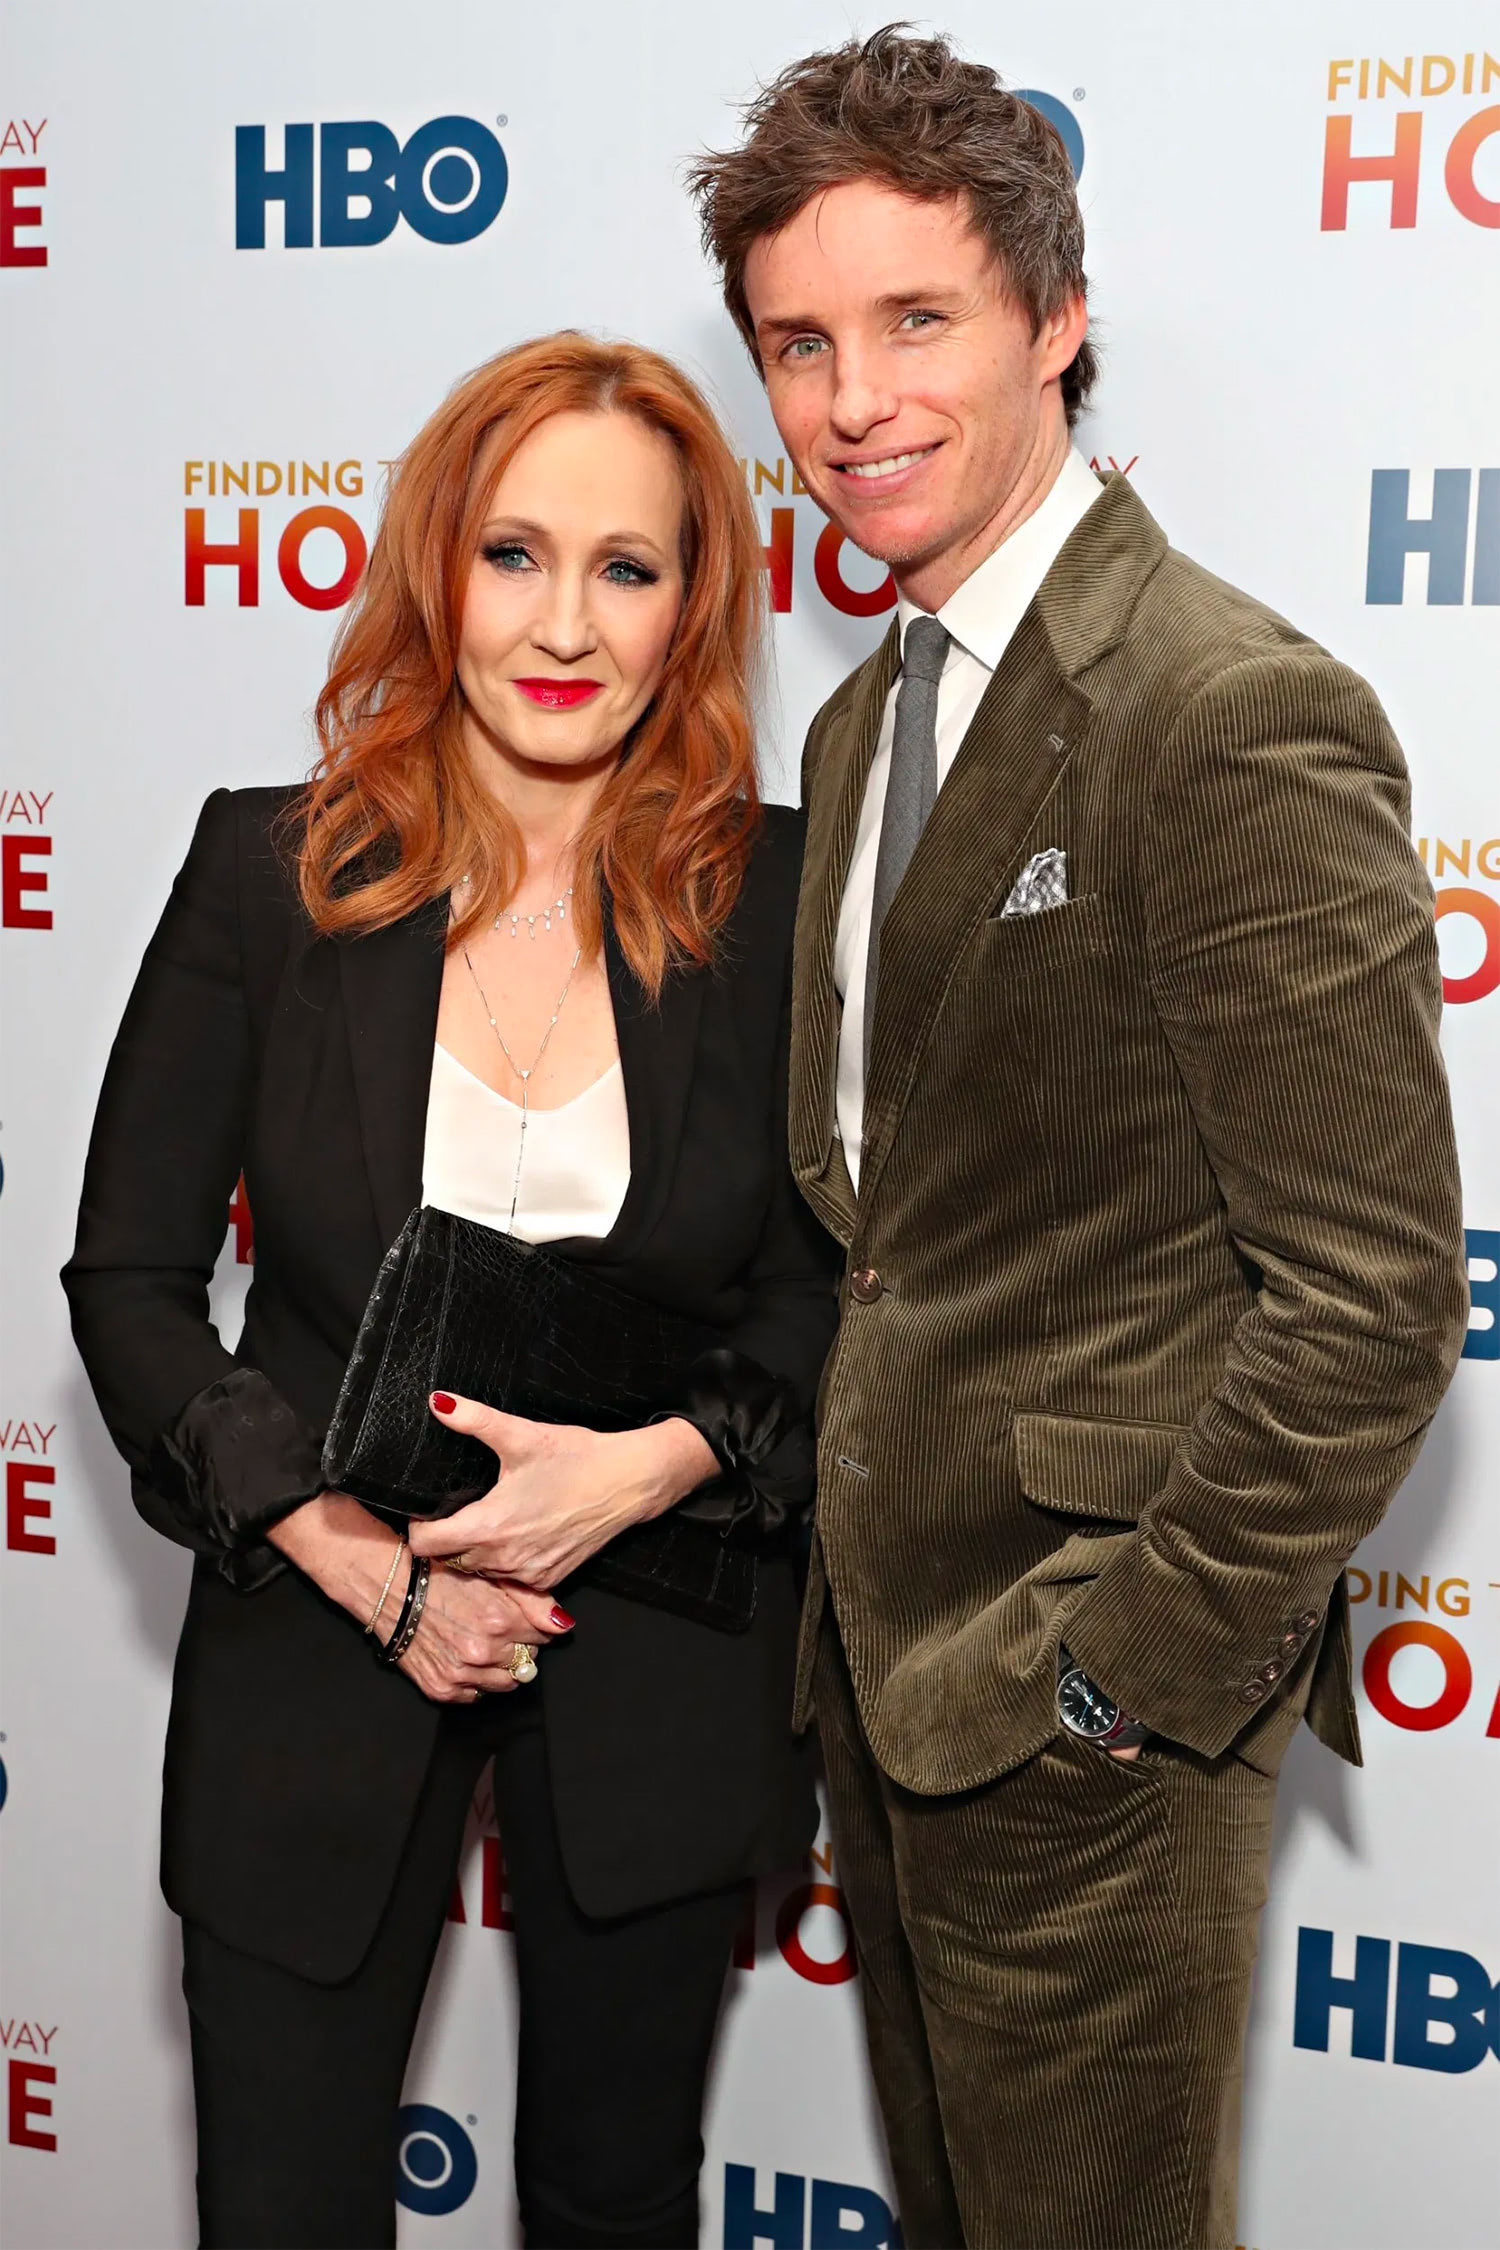 J.K. Rowling and Eddie Redmayne at the ‘Finding the Way Home’ premiere